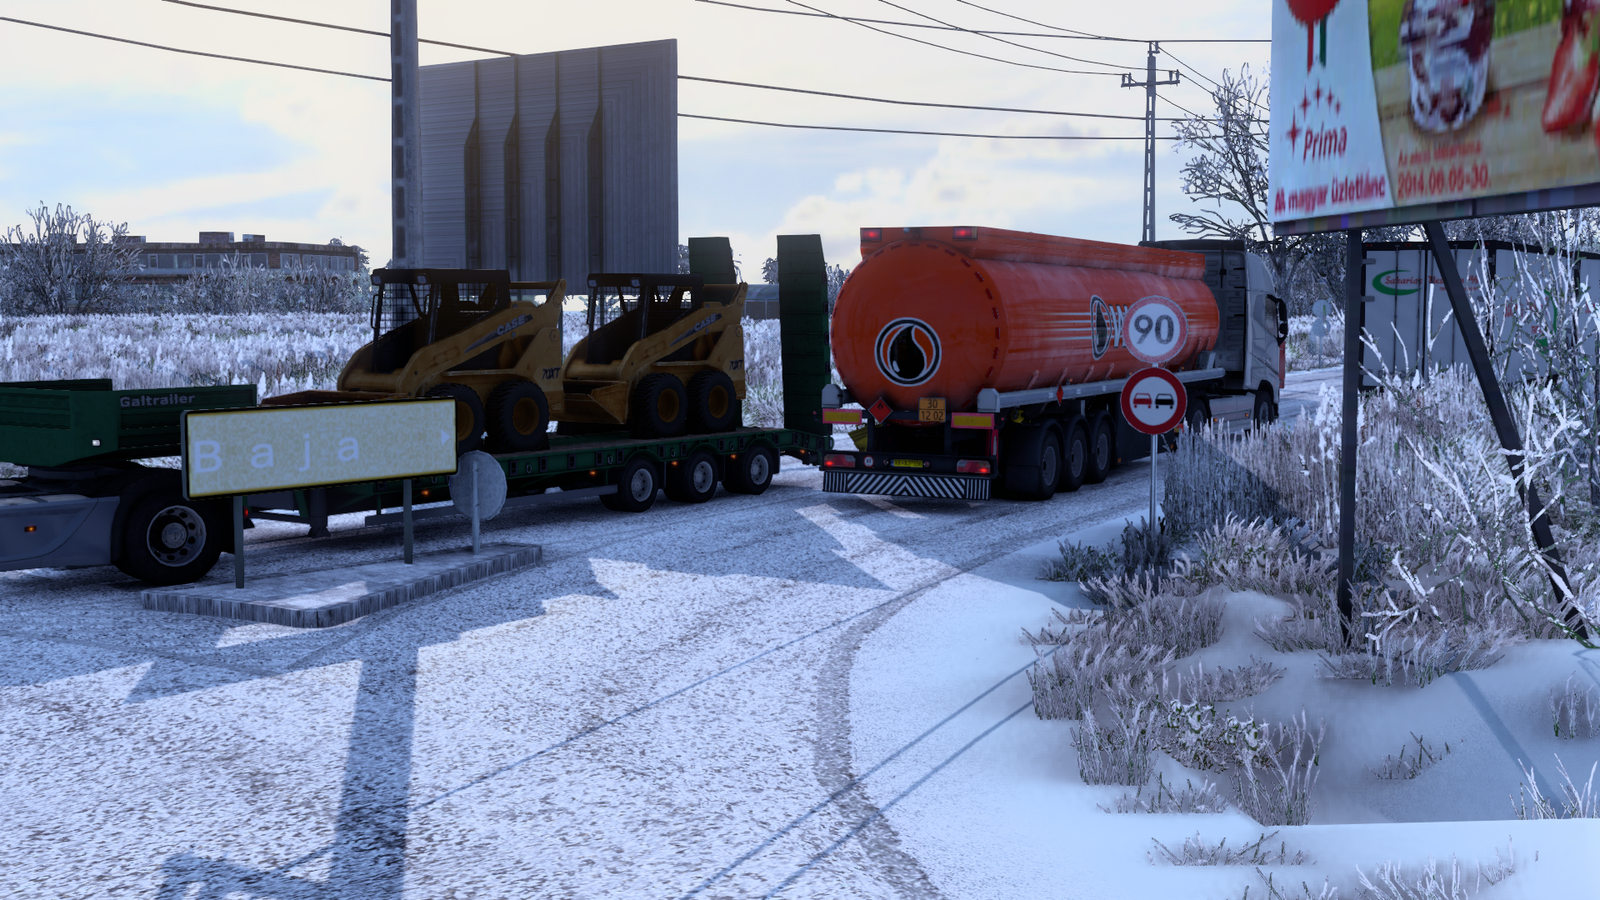 ets2_20221215_104033_00.png